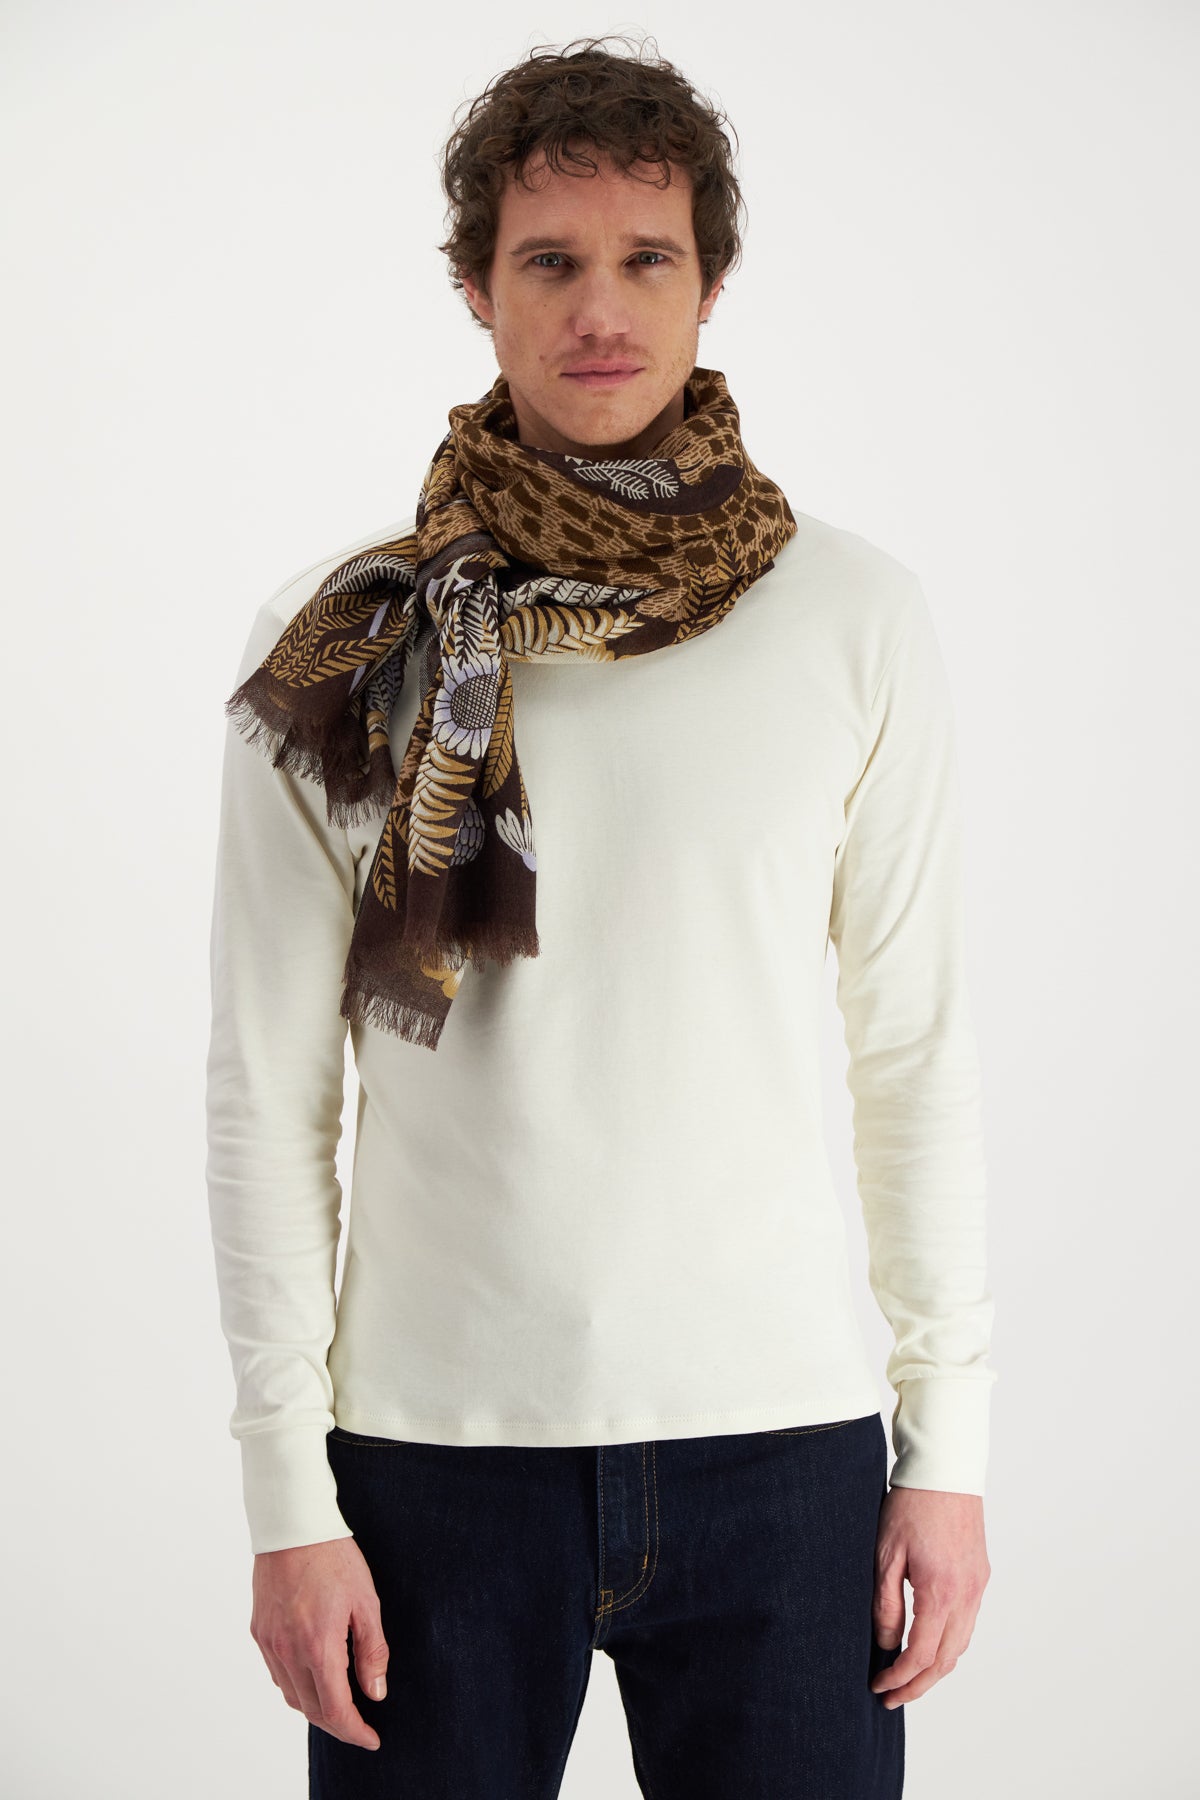 Rousseau Natural Wool Scarf